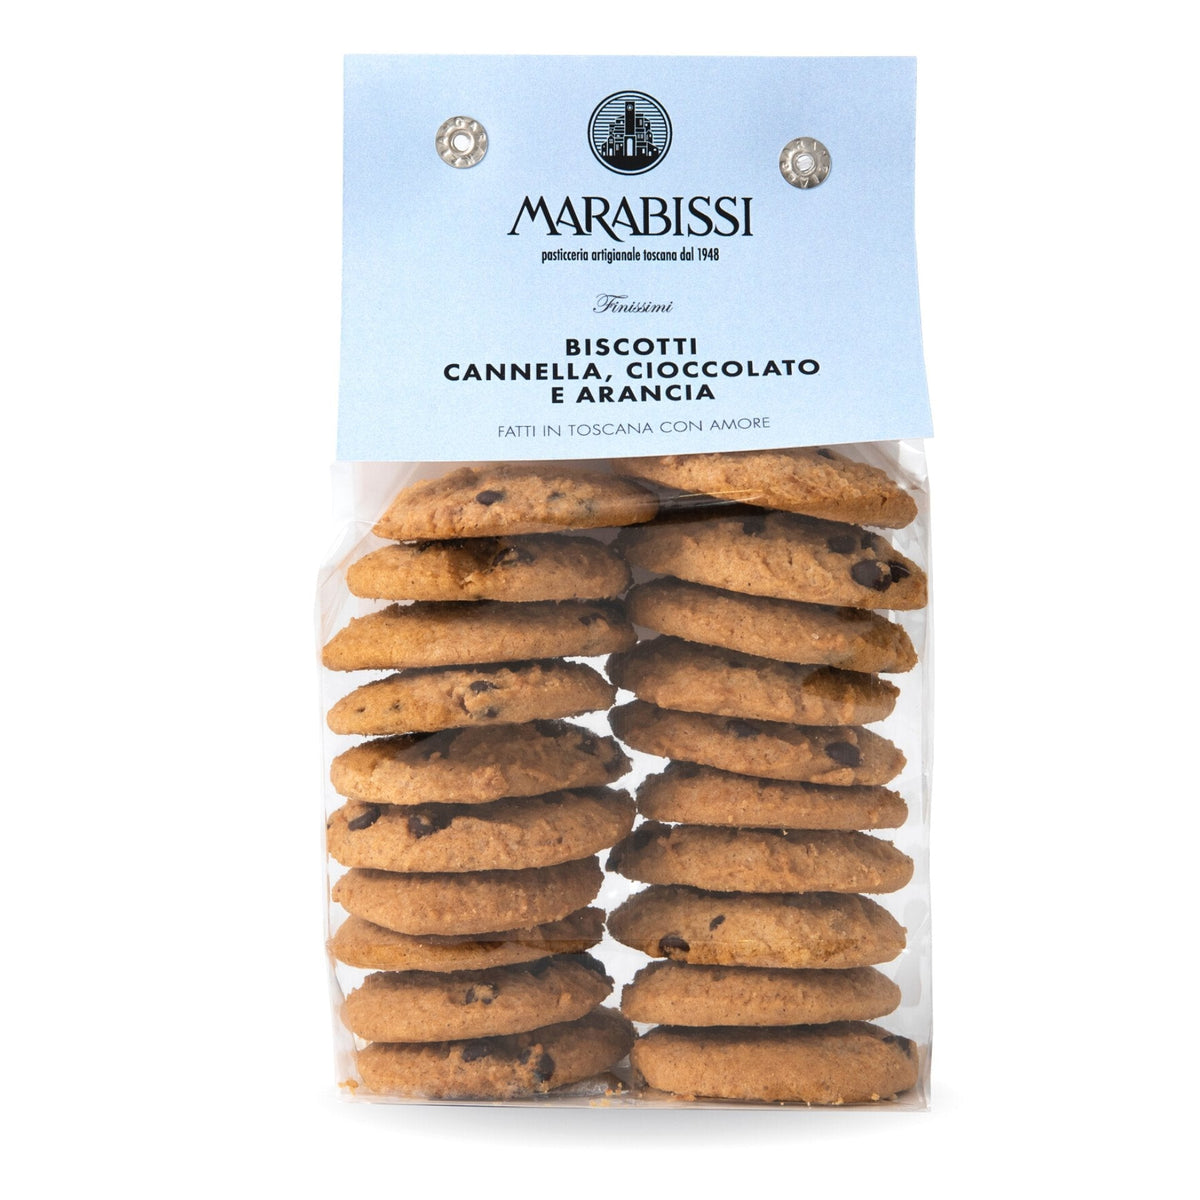 Marabissi Chocolate, Cinnamon &amp; Orange Artisan Biscuits (Bag) 200g  | Imported and distributed in the UK by Just Gourmet Foods